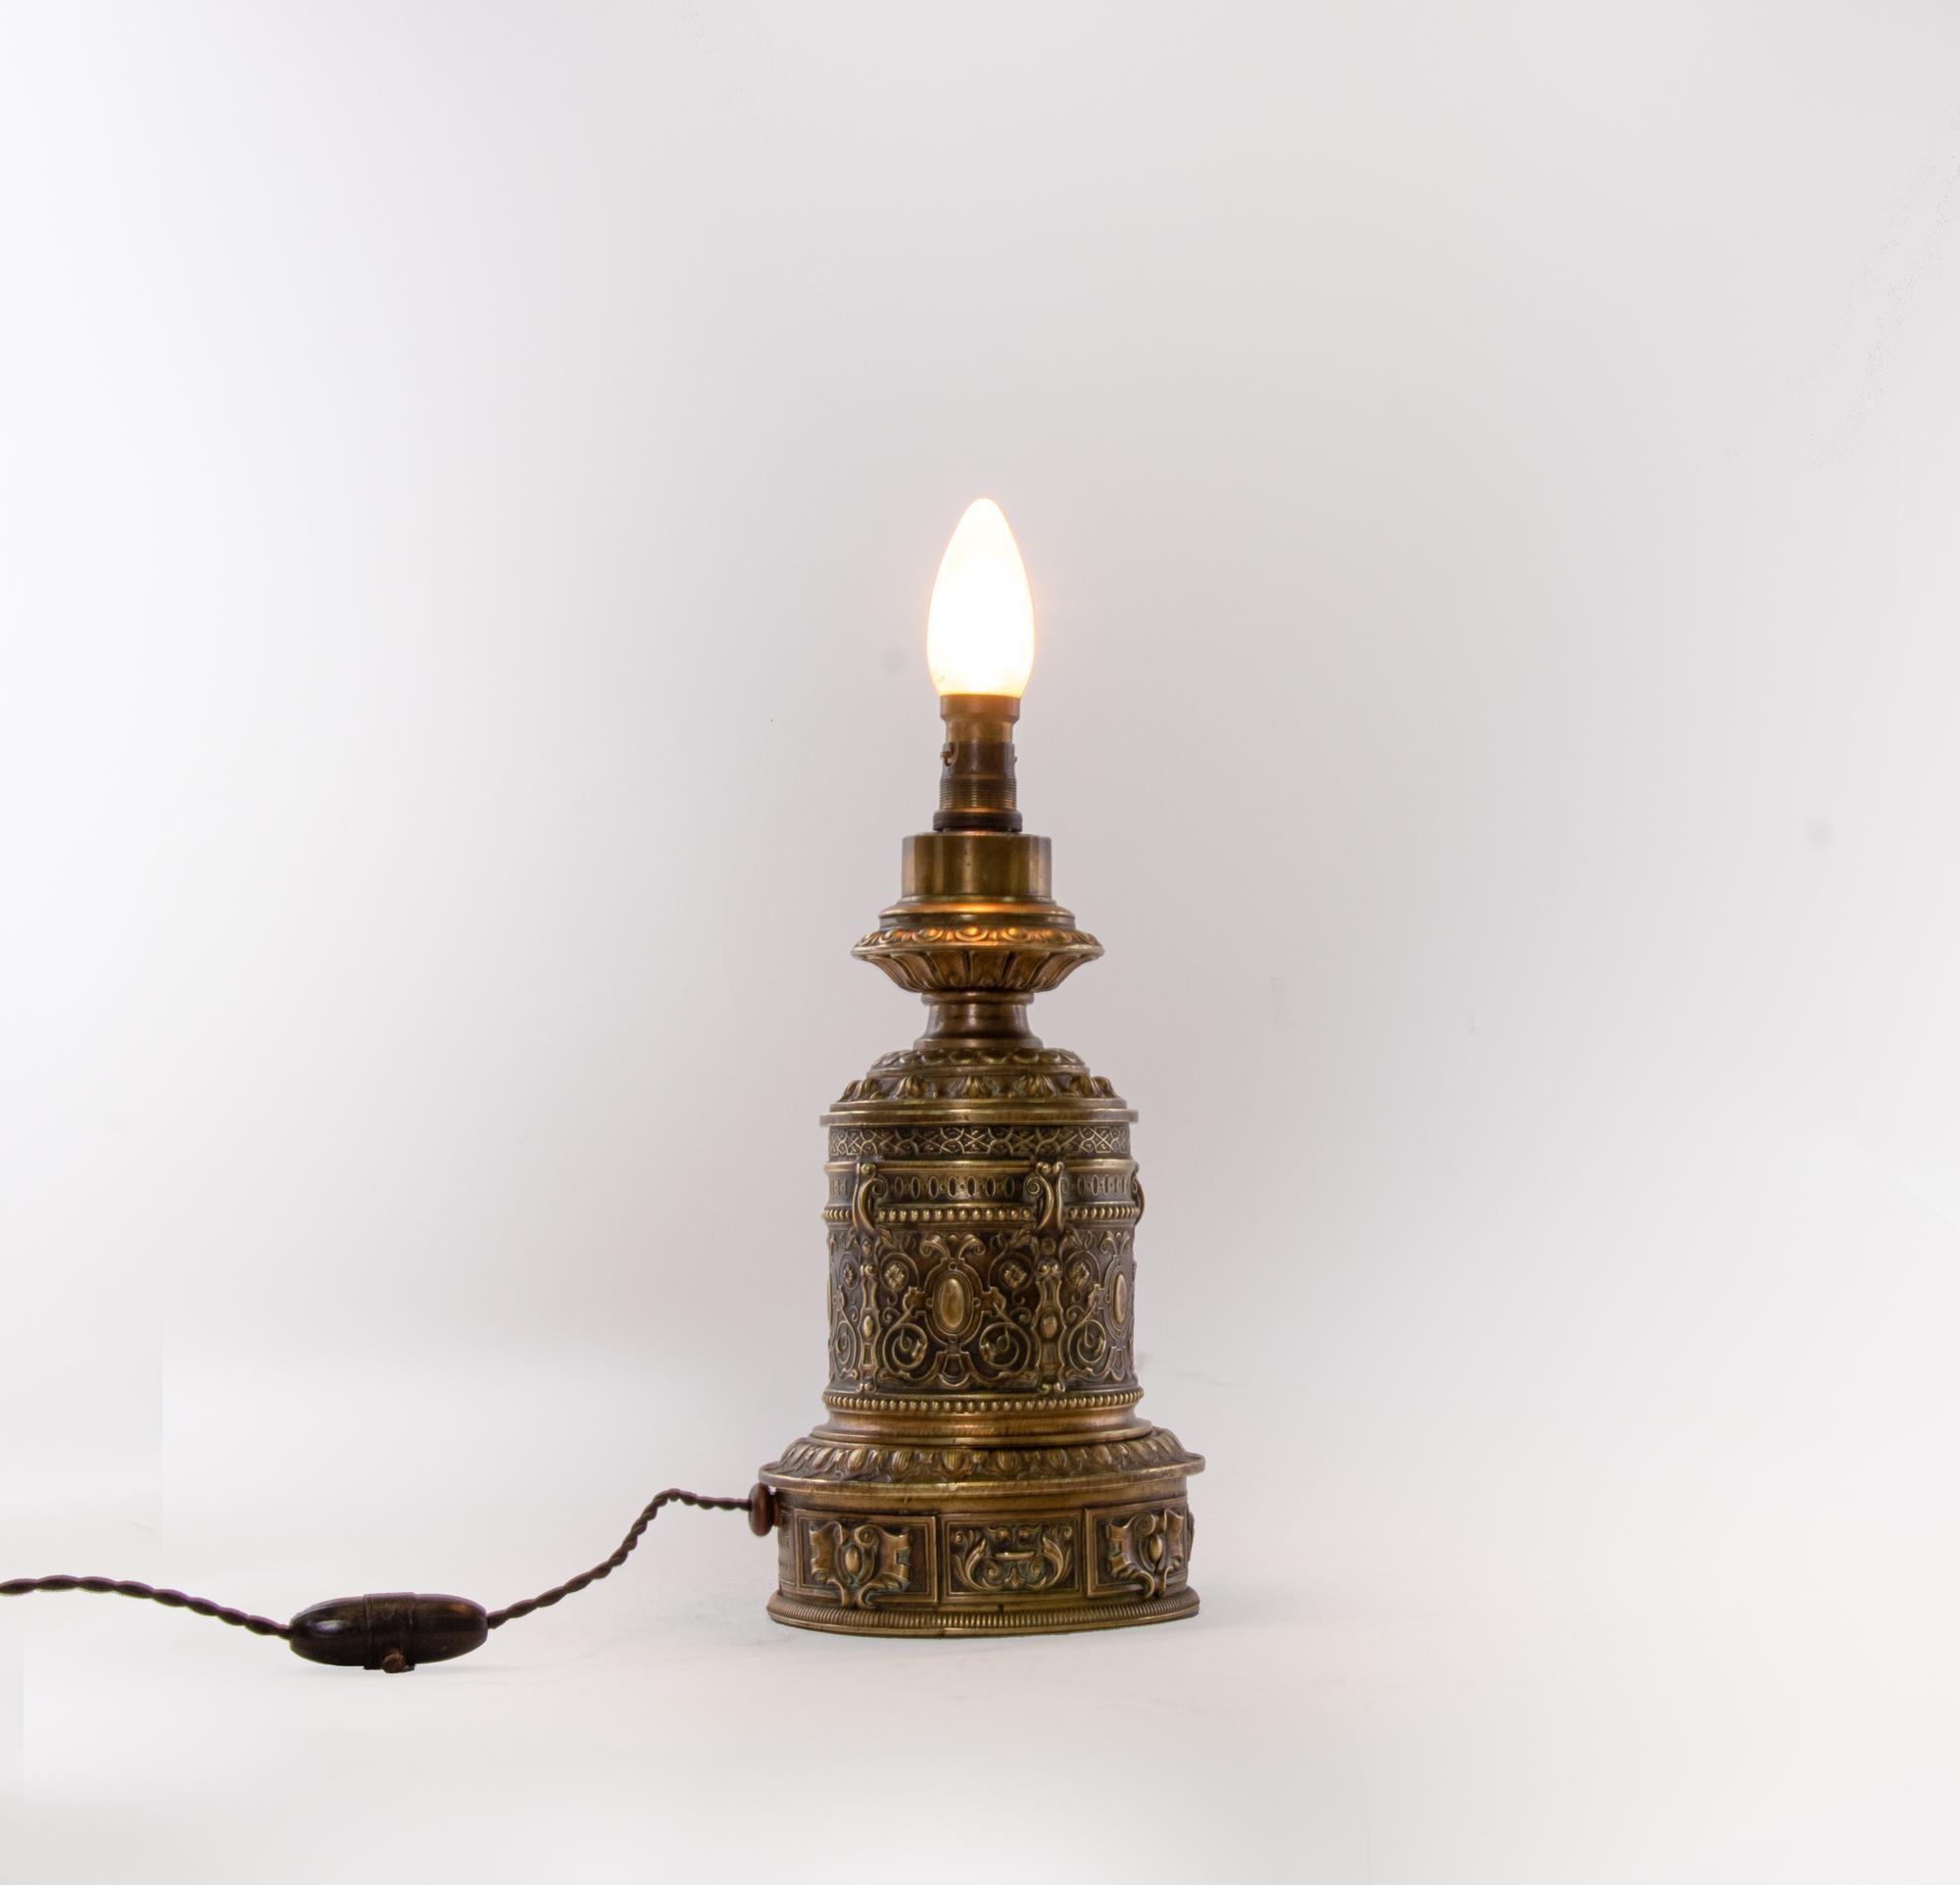 Hand-Crafted Bronze Table Light by Gagneau D'Enghien 25, Paris, 19th Century